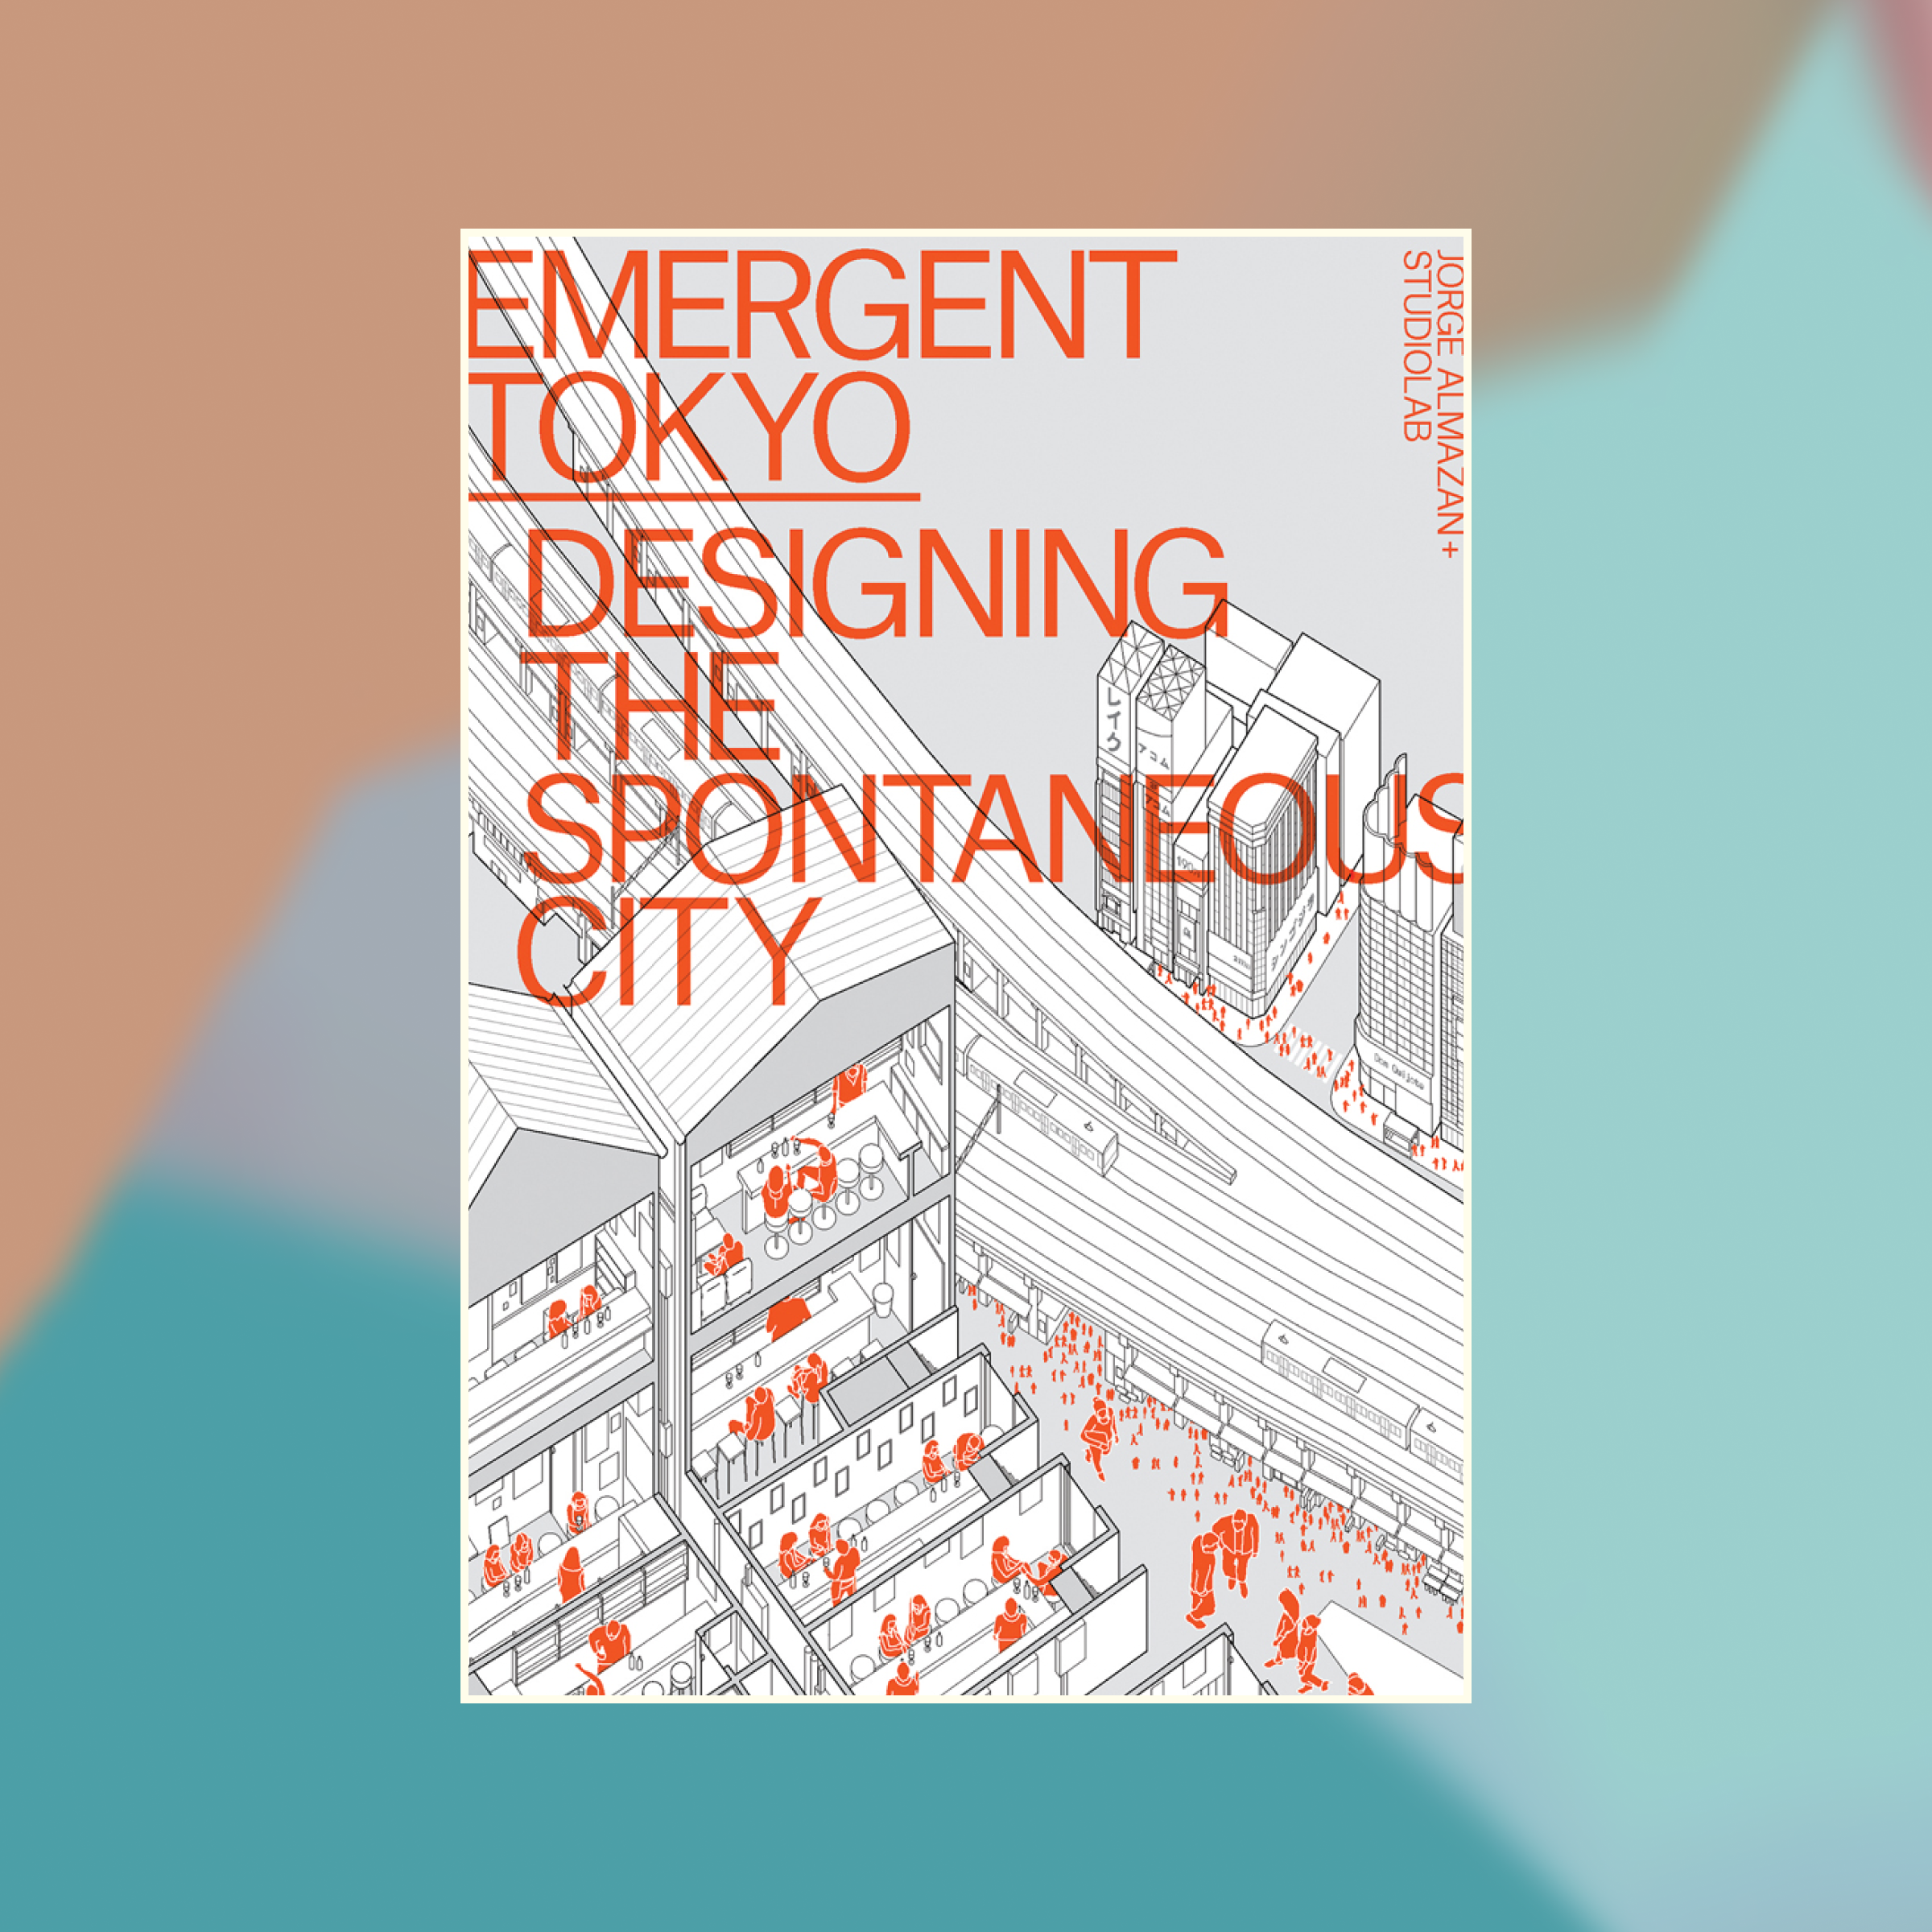 Book cover of Emergent Tokyo against an abstract painted background